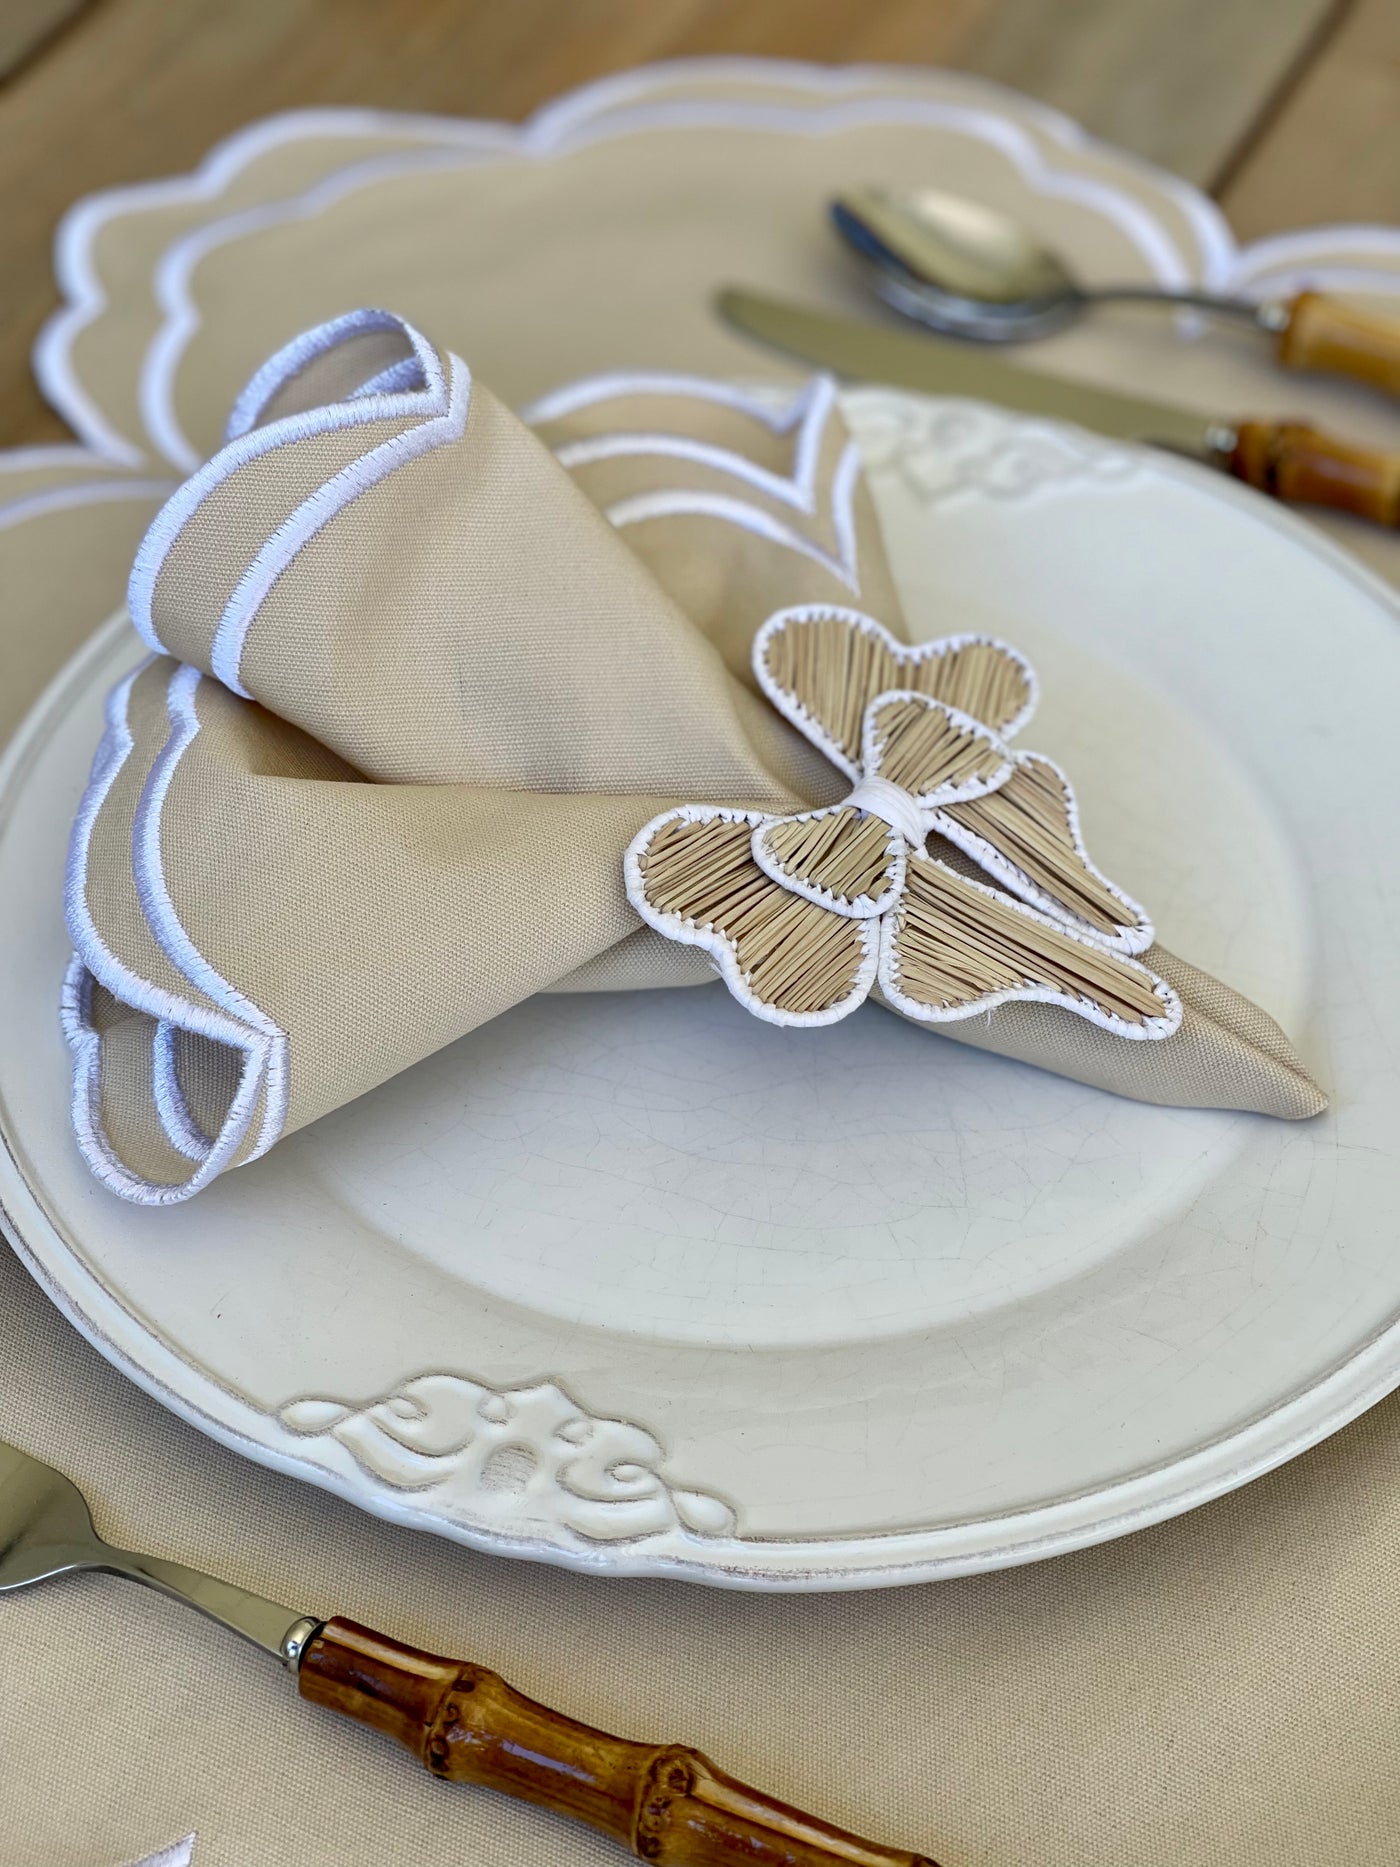 'High Tea' Placemat and Napkin Set - Ivory Scalloped